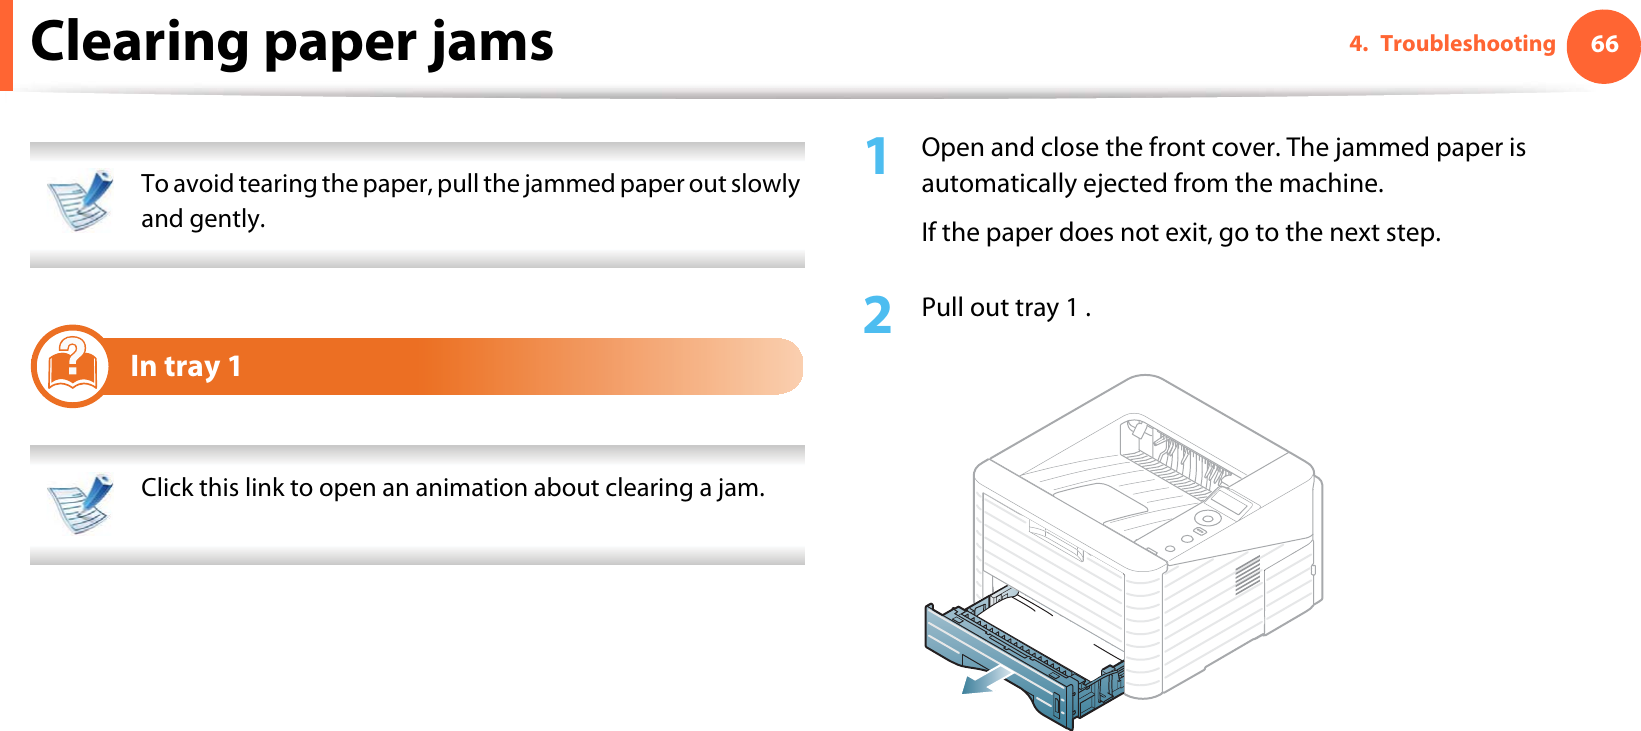 664. TroubleshootingClearing paper jams To avoid tearing the paper, pull the jammed paper out slowly and gently.  1In tray 1 Click this link to open an animation about clearing a jam. 1Open and close the front cover. The jammed paper is automatically ejected from the machine.If the paper does not exit, go to the next step.2  Pull out tray 1 .